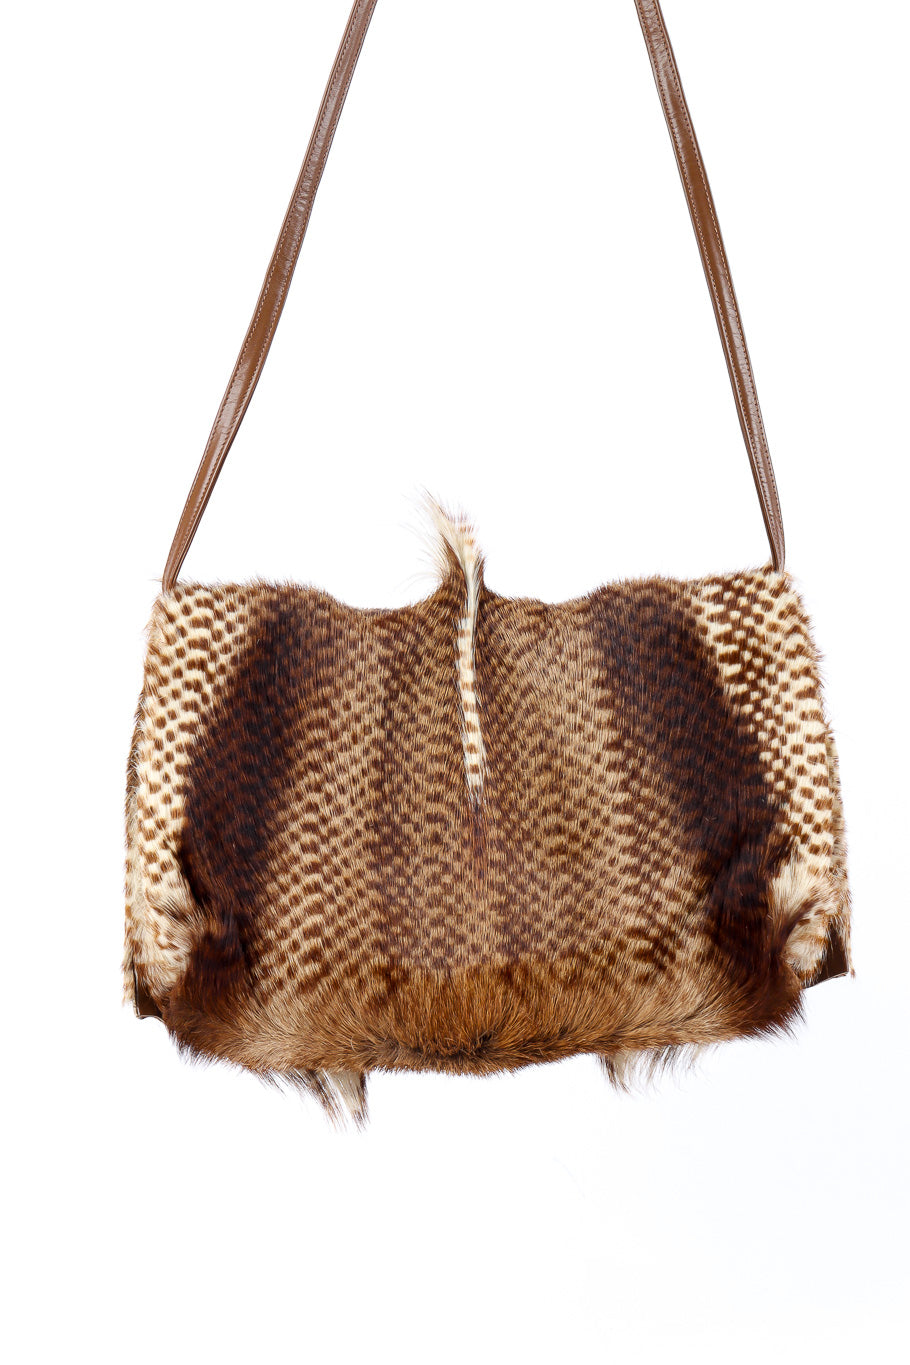 Leather and fur bag by Halston hanging back @recessla